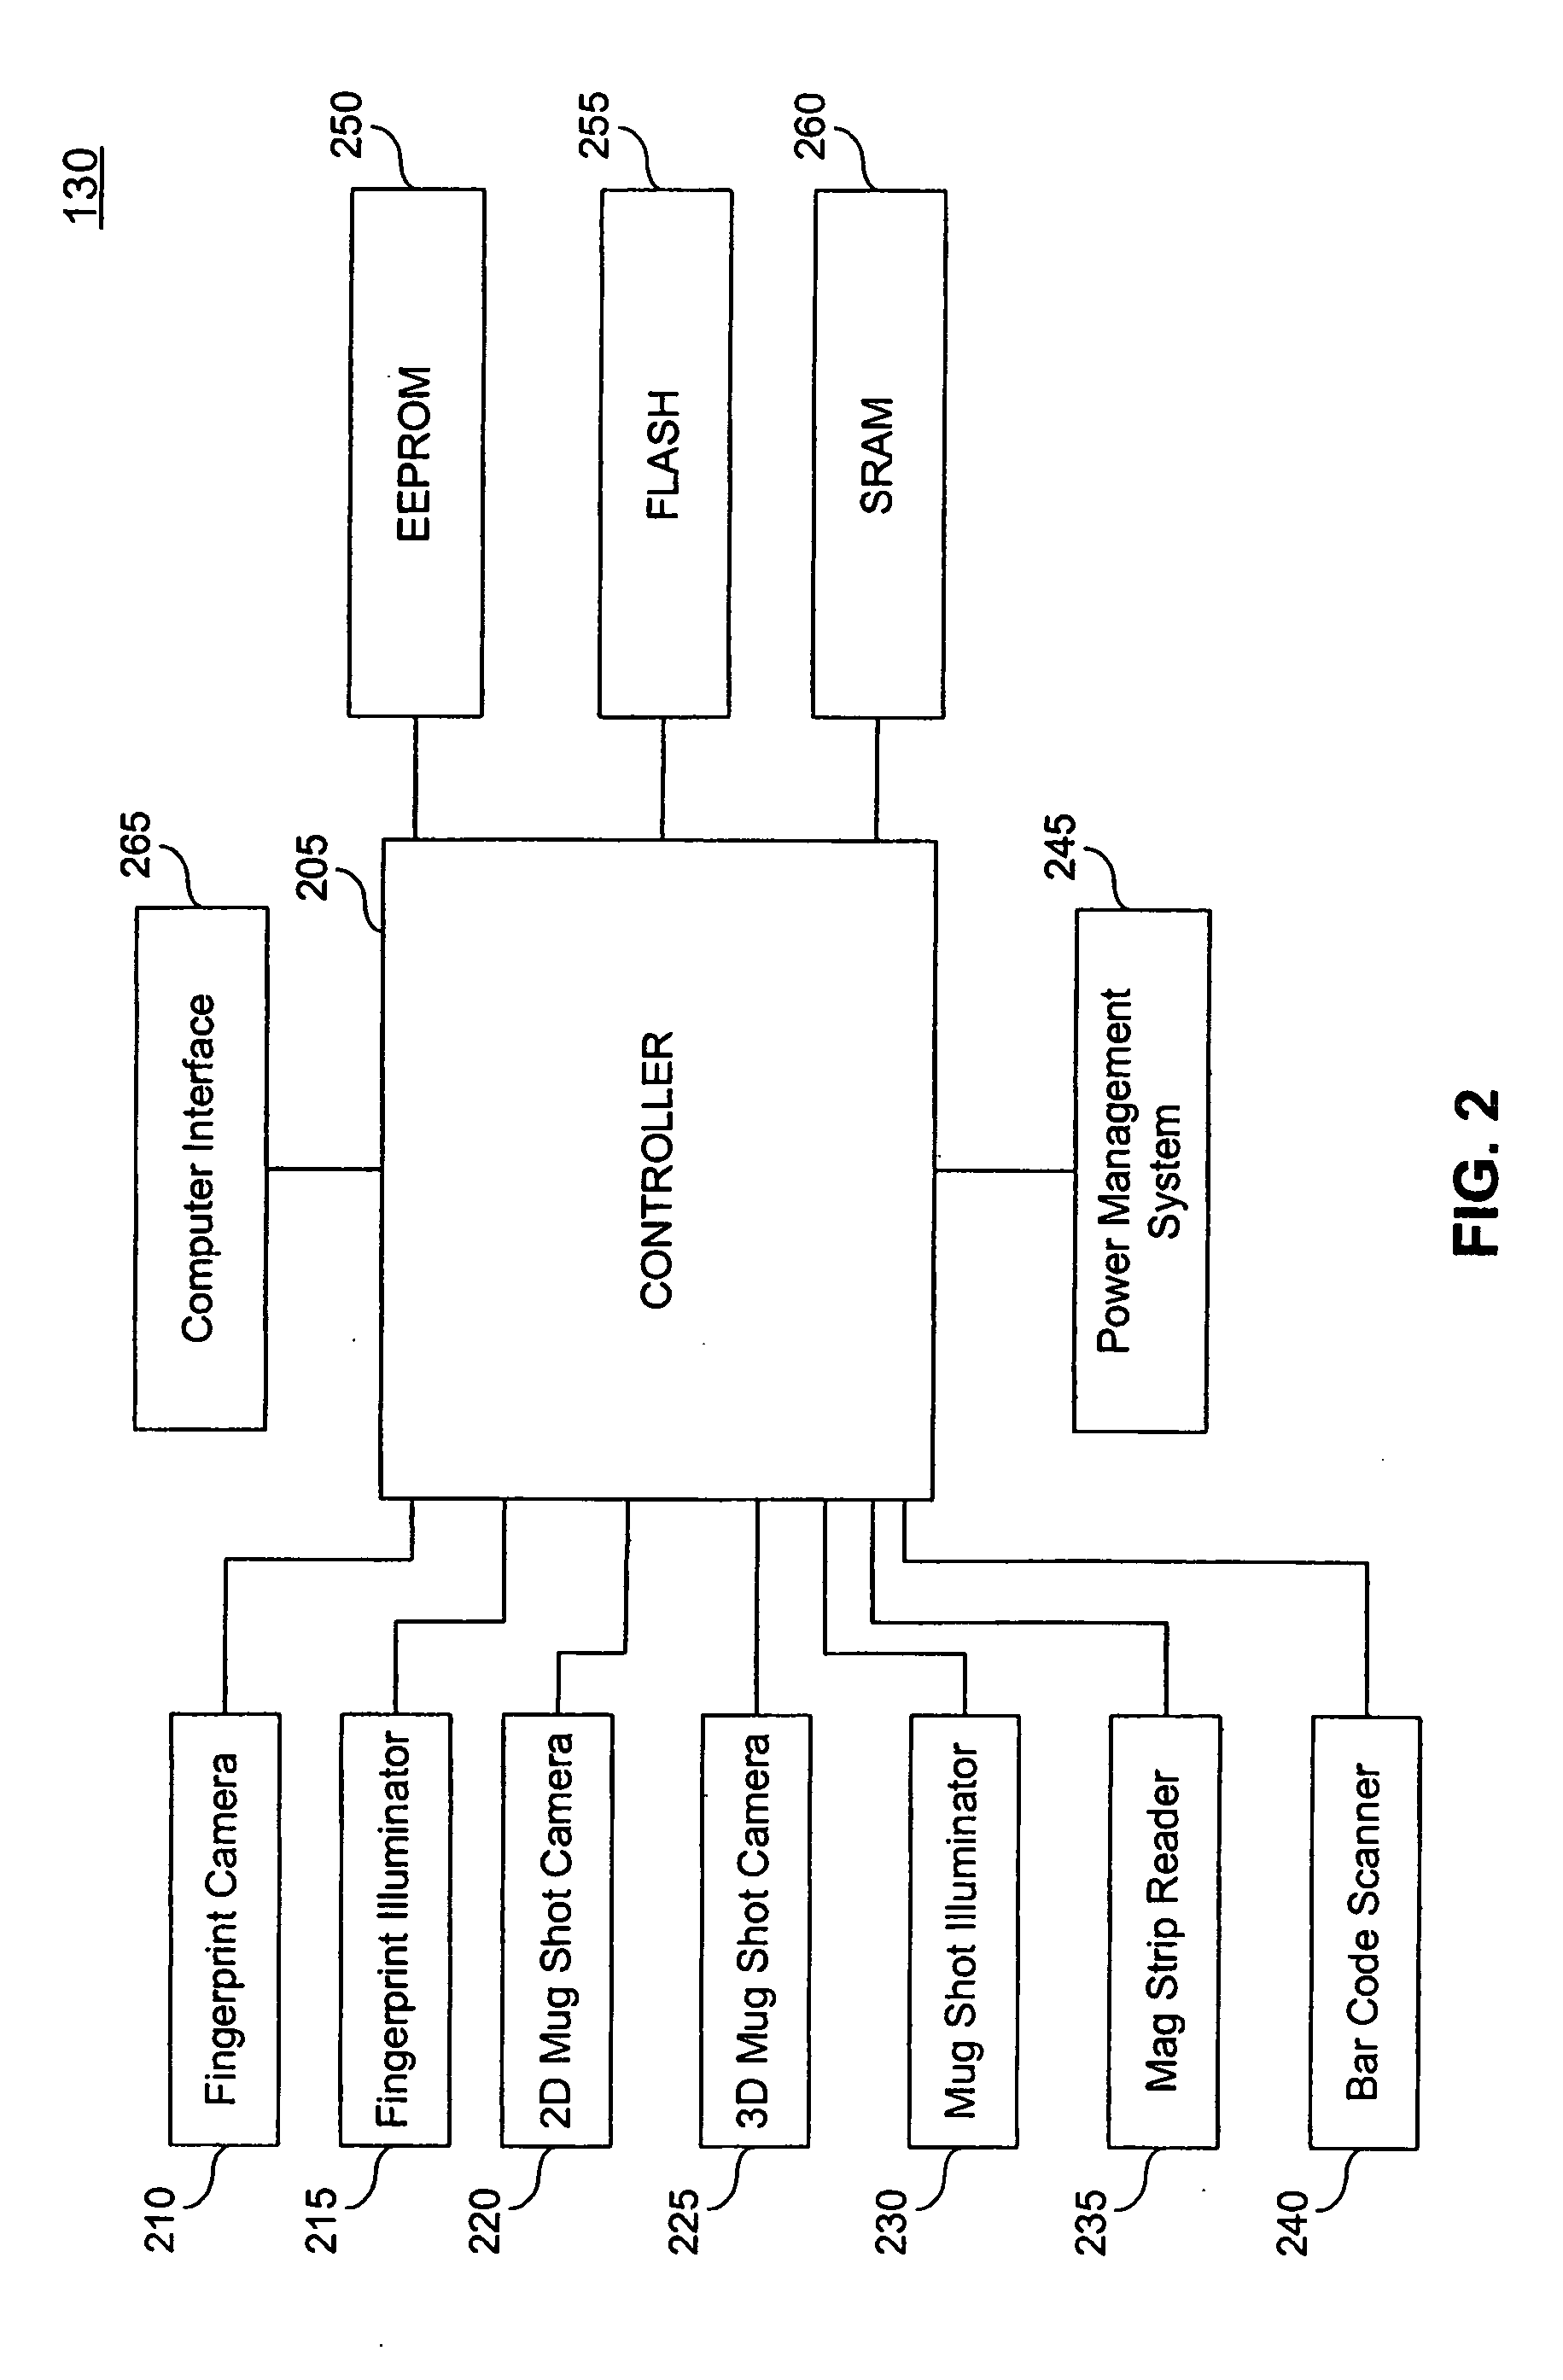 Hand-held personal identification analysis device and methods of use